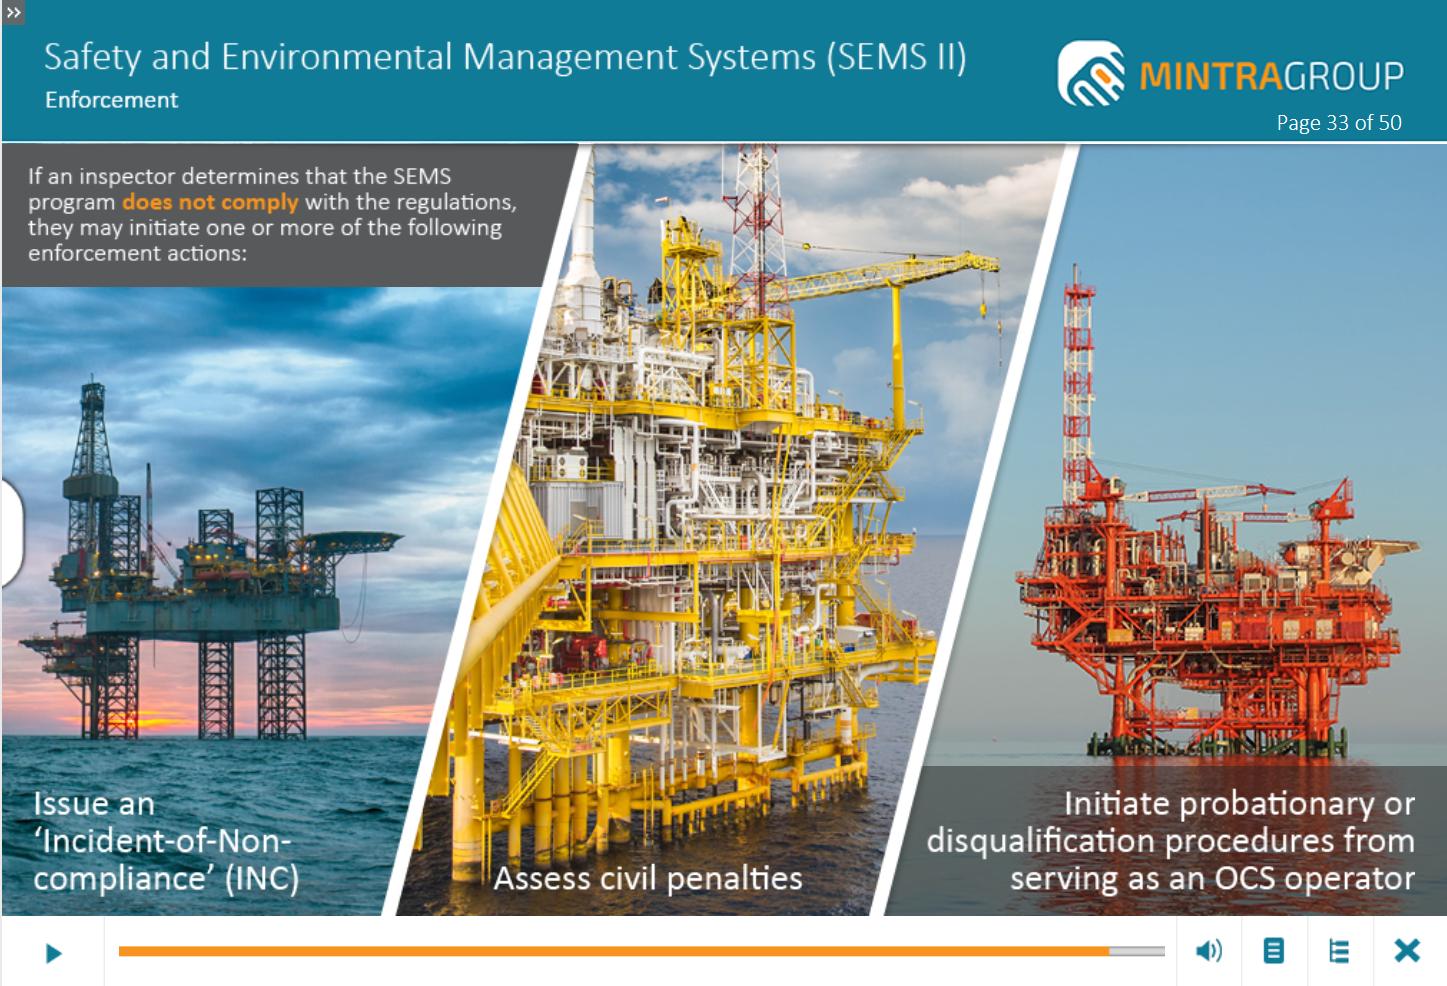 Safety and Environmental Management Systems (SEMS) (US) Training